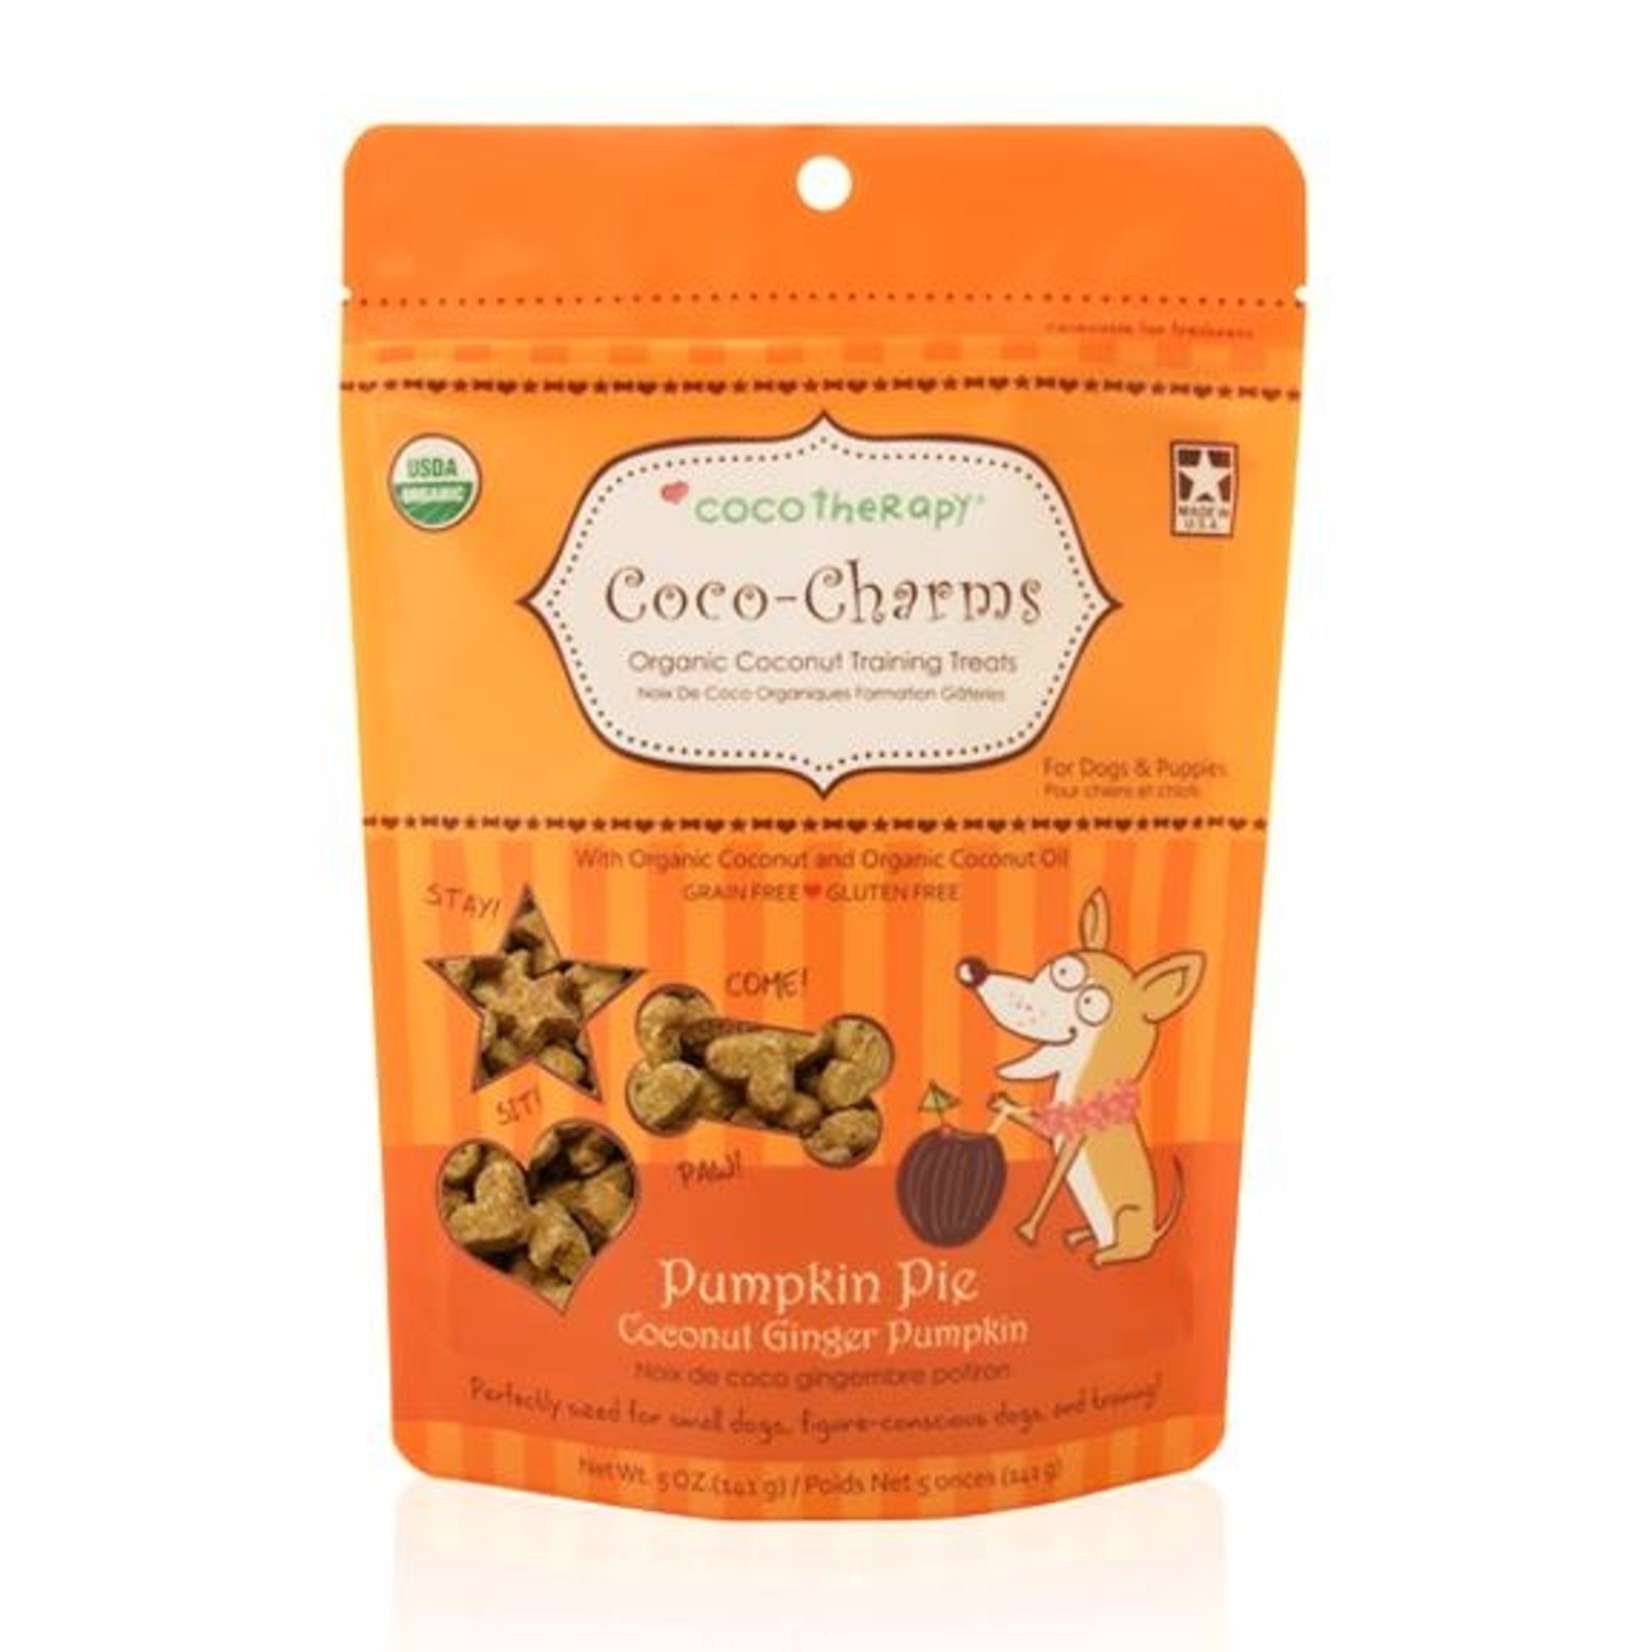 CocoTherapy Coco Therapy - Coco-Charms 5 oz